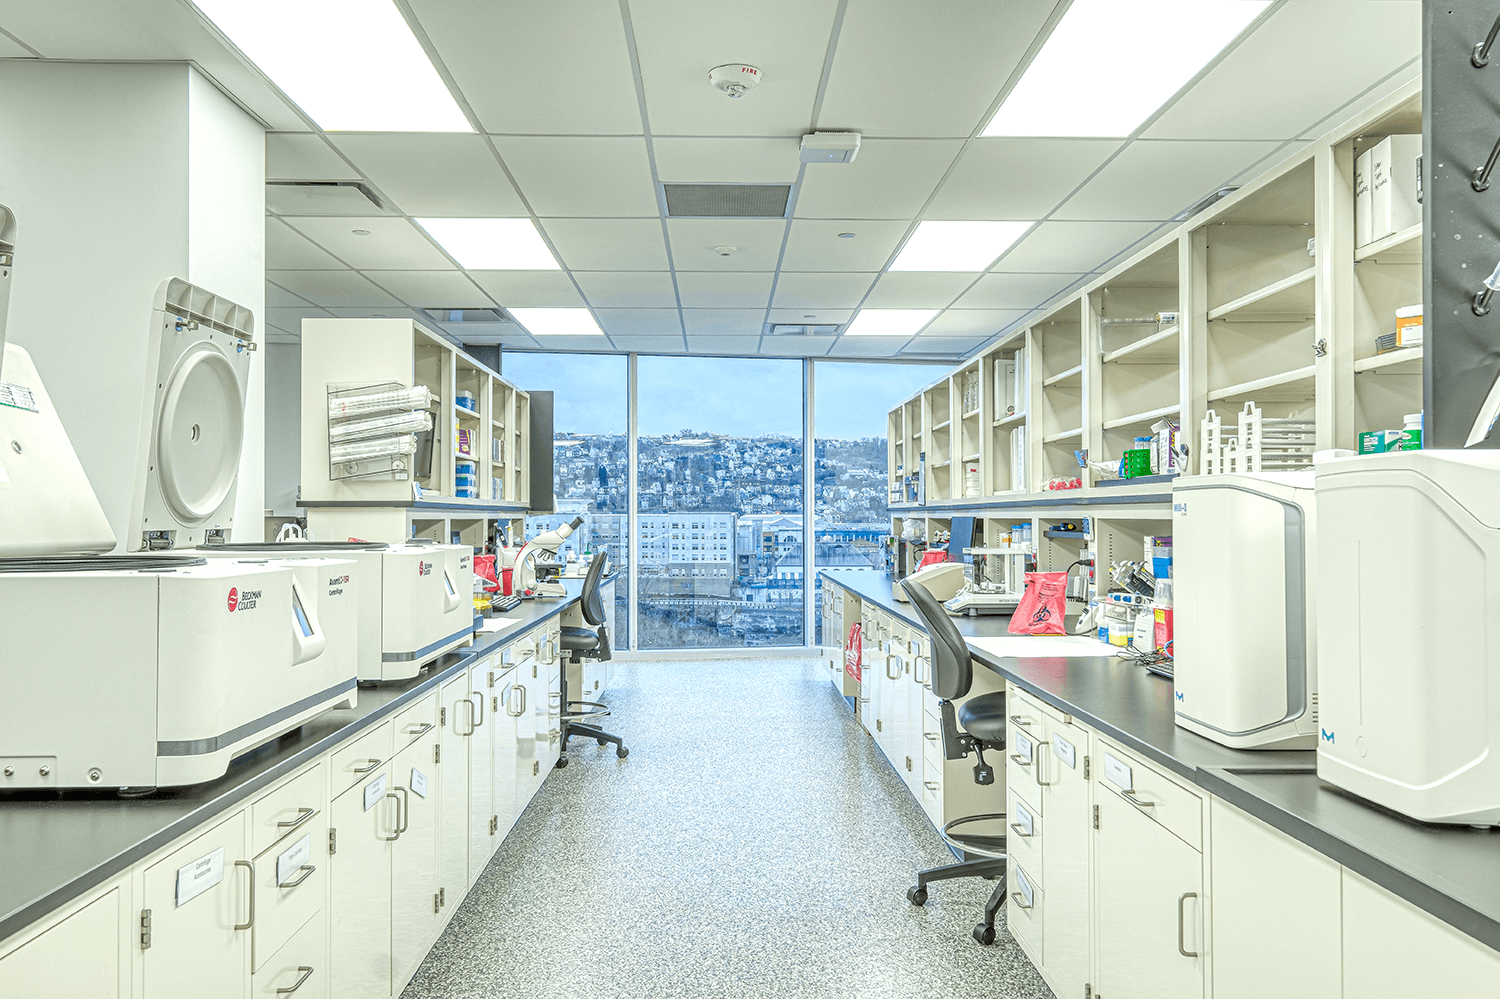 wet lab workspace with shelves and lab equipment